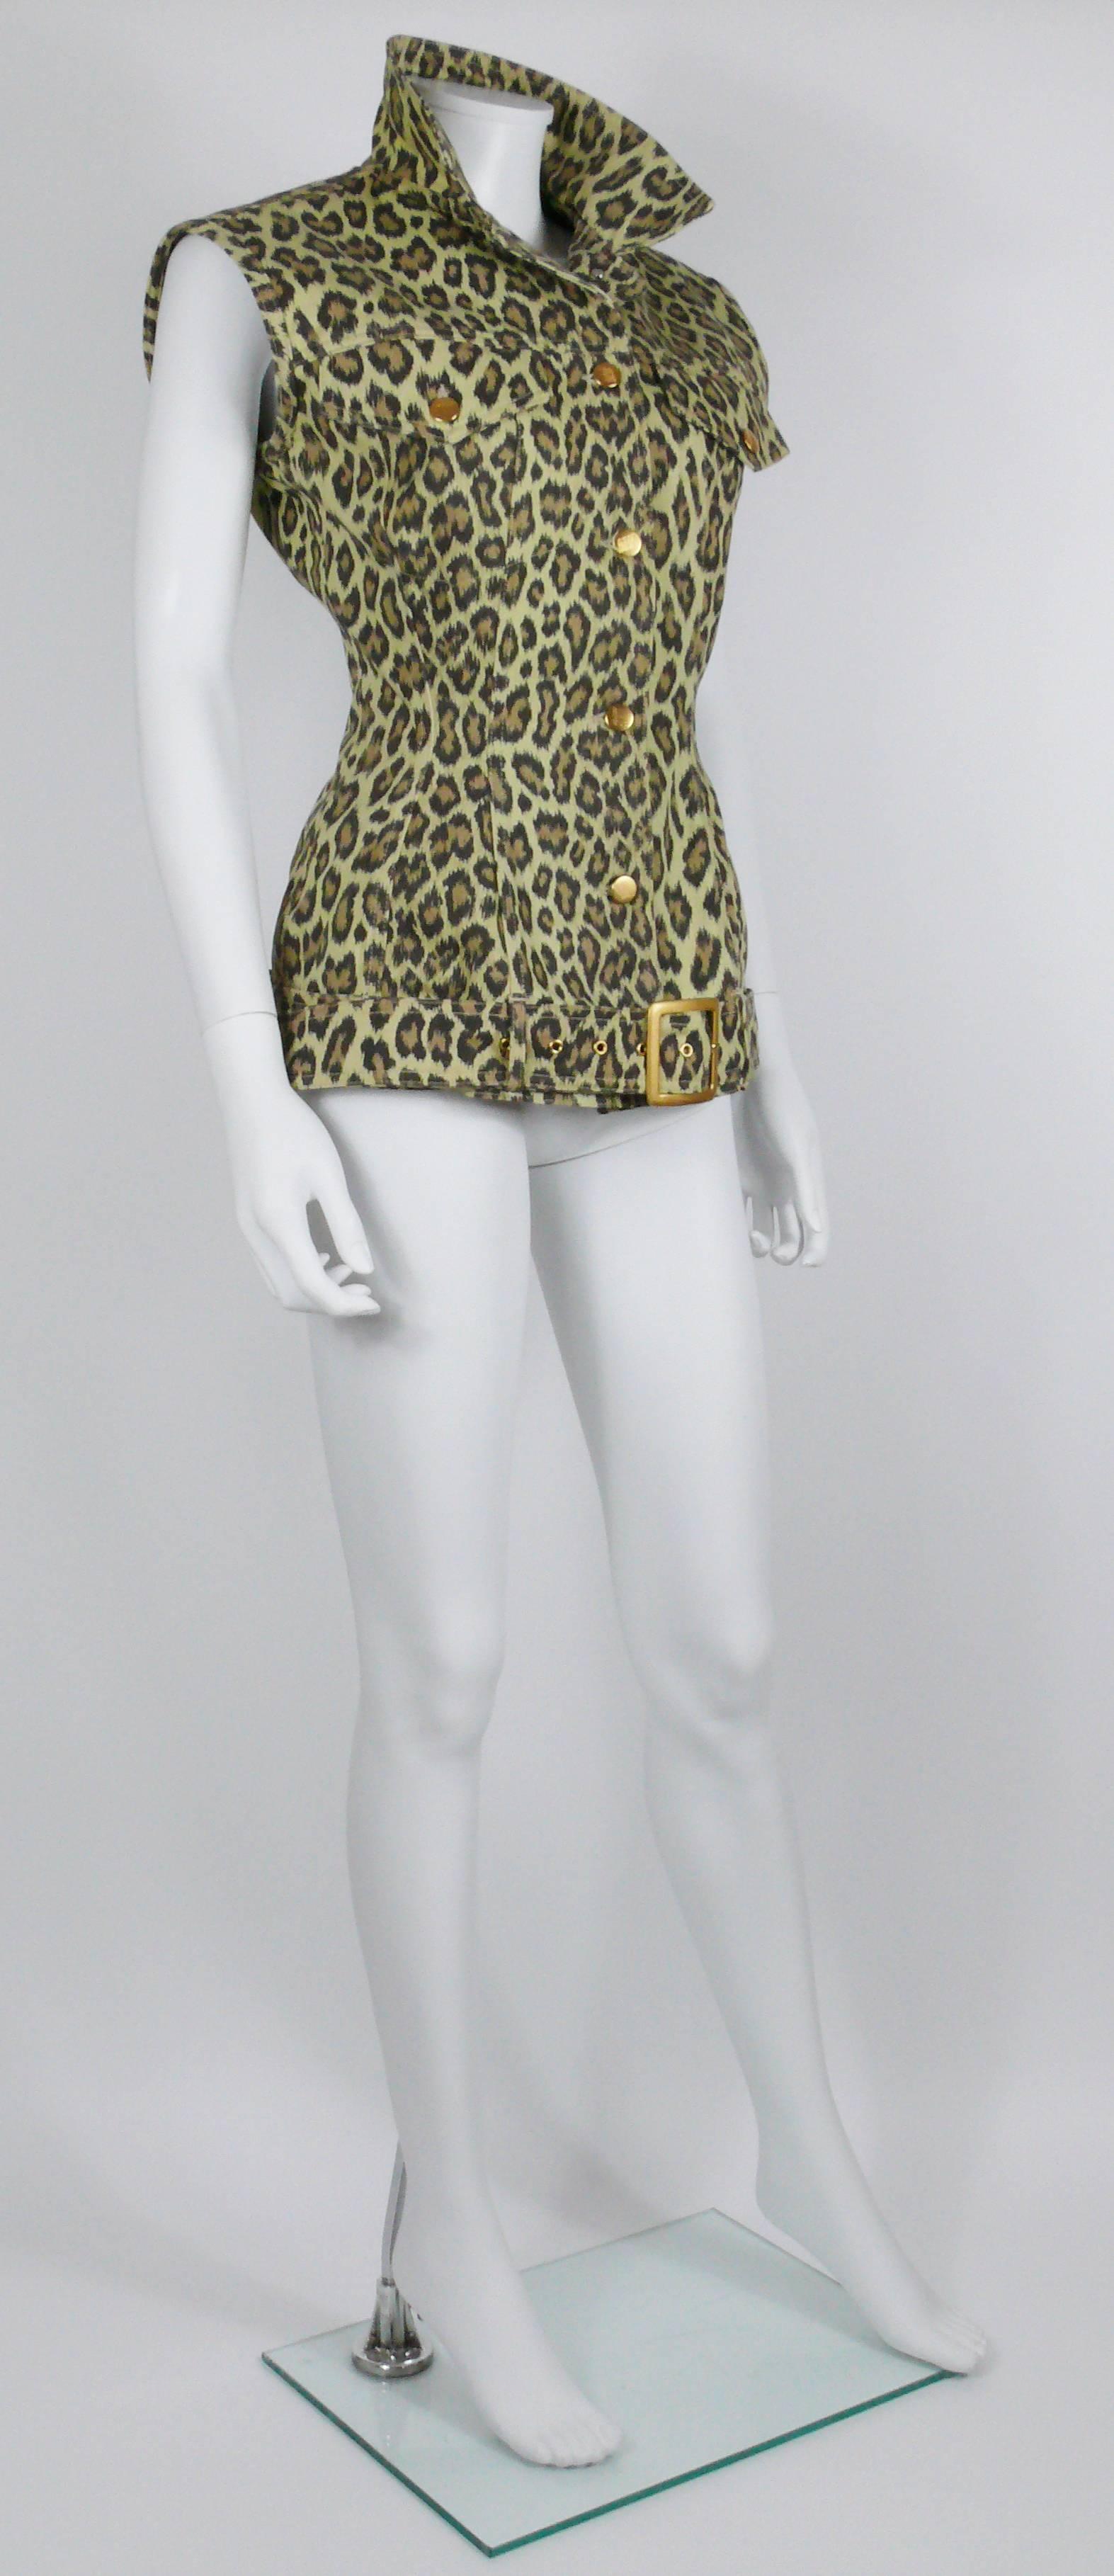 JEAN PAUL GAULTIER vintage cheetah print denim corset jacket.

Front buttoning.
Two pockets at the front.
Corset cut design.
Removable belt featuring matte gold tone buckle.

Label reads JUNIOR GAULTIER Made in Italy.

Composition label reads : 100